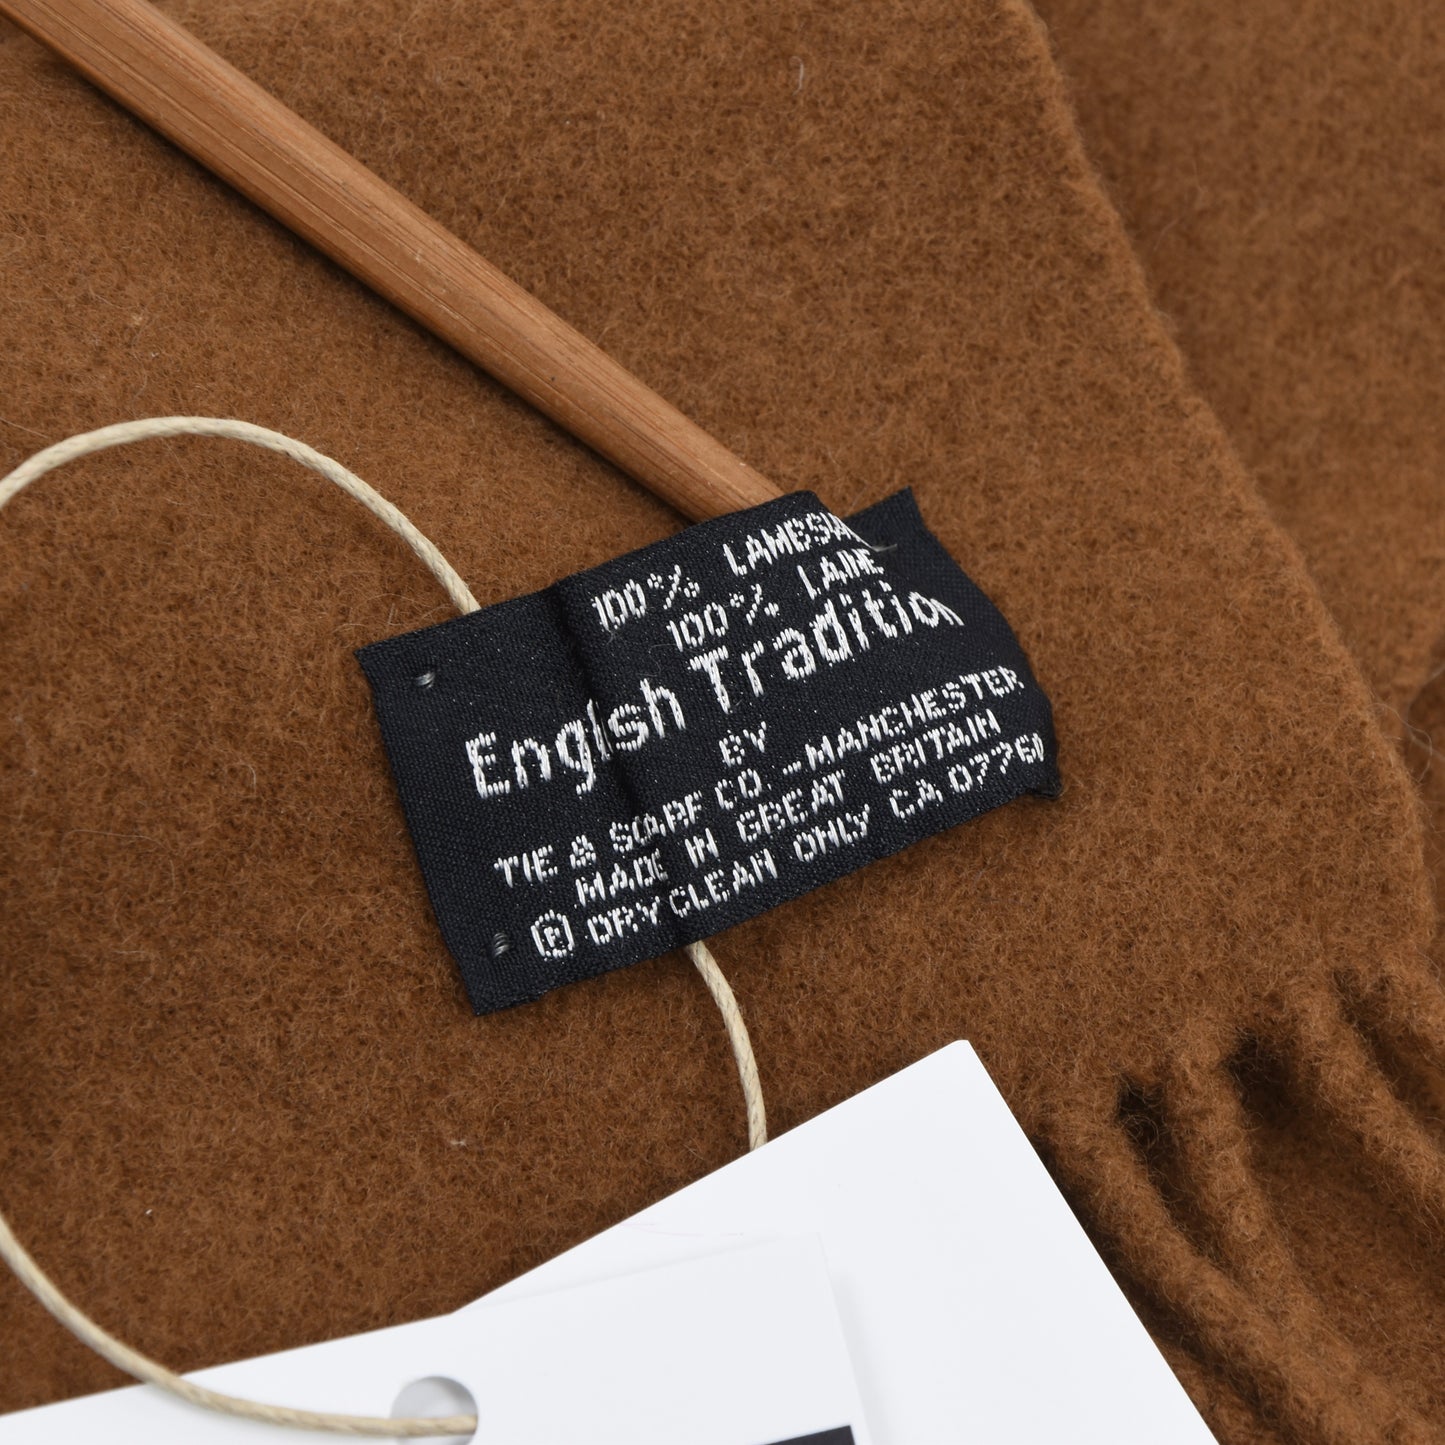 English Tradition by Tie & Scarf Co. Manchester Wool Scarf - Tobacco Brown